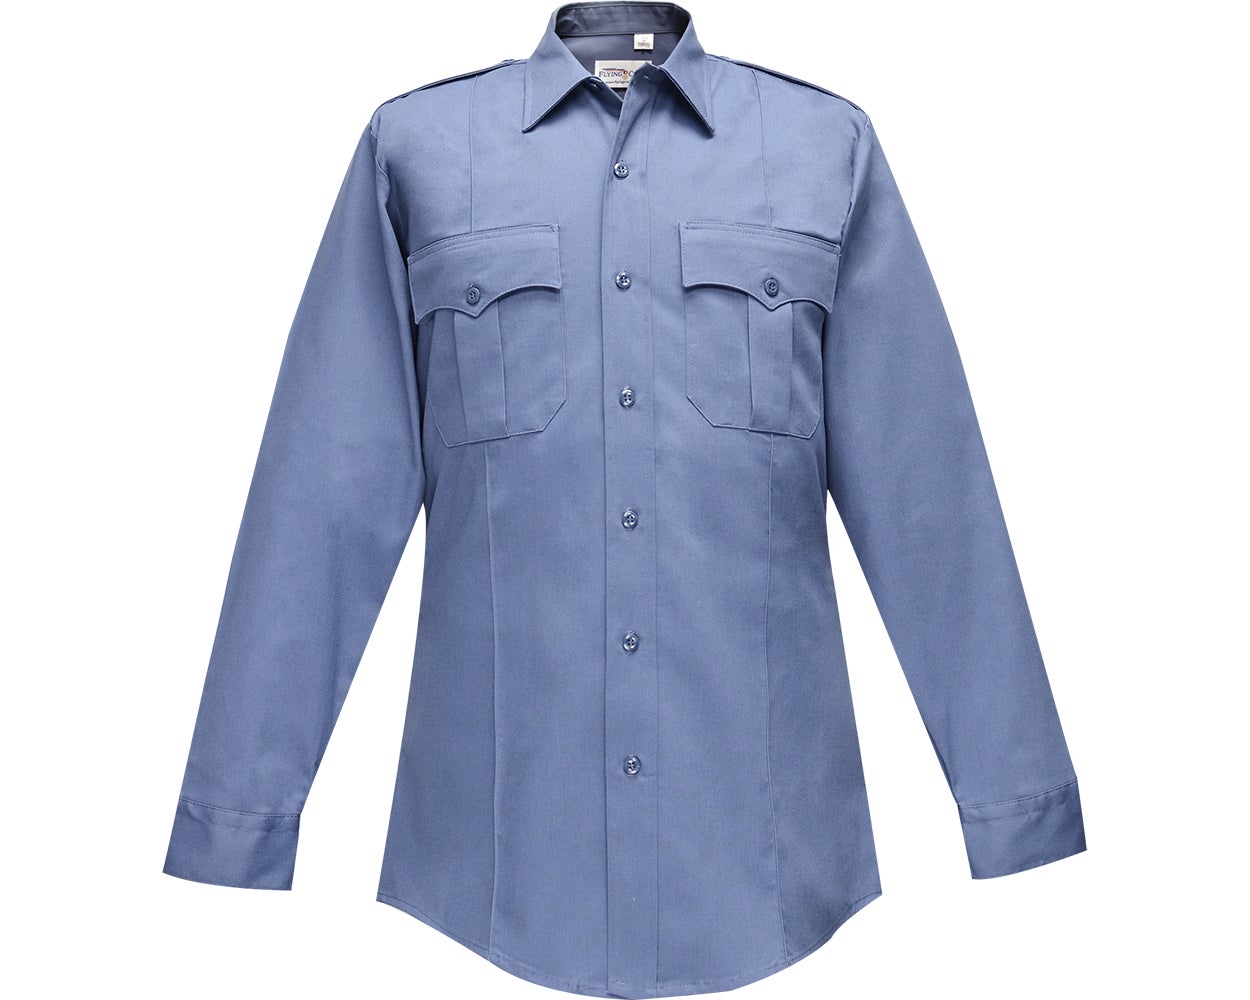 Flying Cross Duro Poplin Poly/Cotton Men's Long Sleeve Uniform Shirt with Sewn-In Creases 35W54 - Marine Blue, 18.5 x 38-39